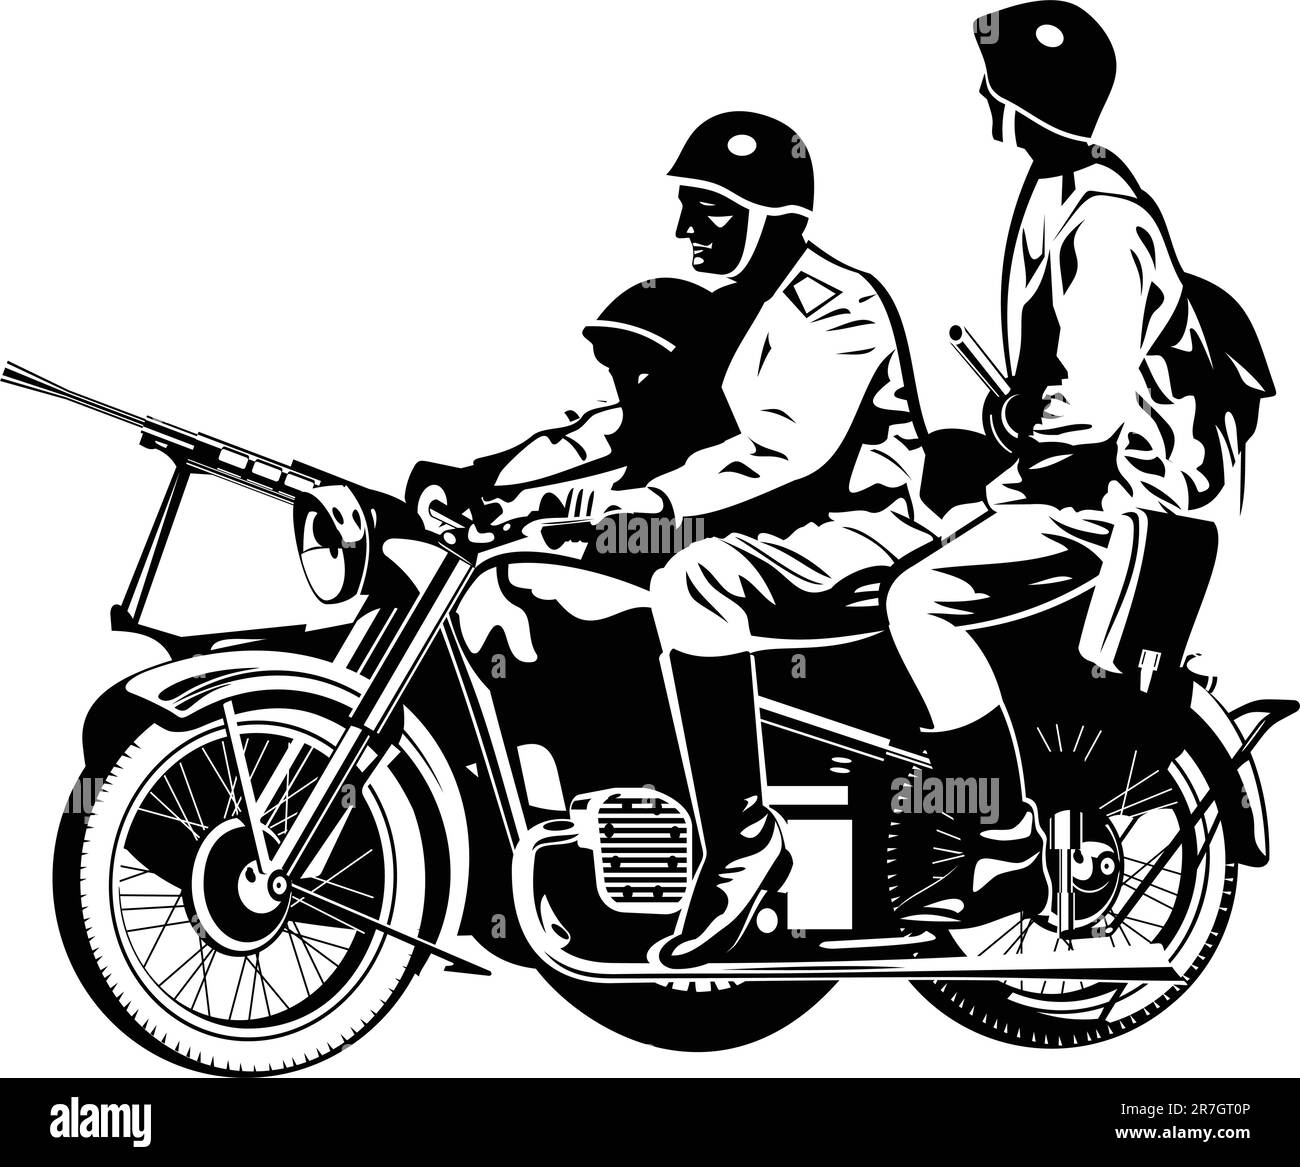 black and white illustration of a motorcycle with a buddy seat. Stock Vector